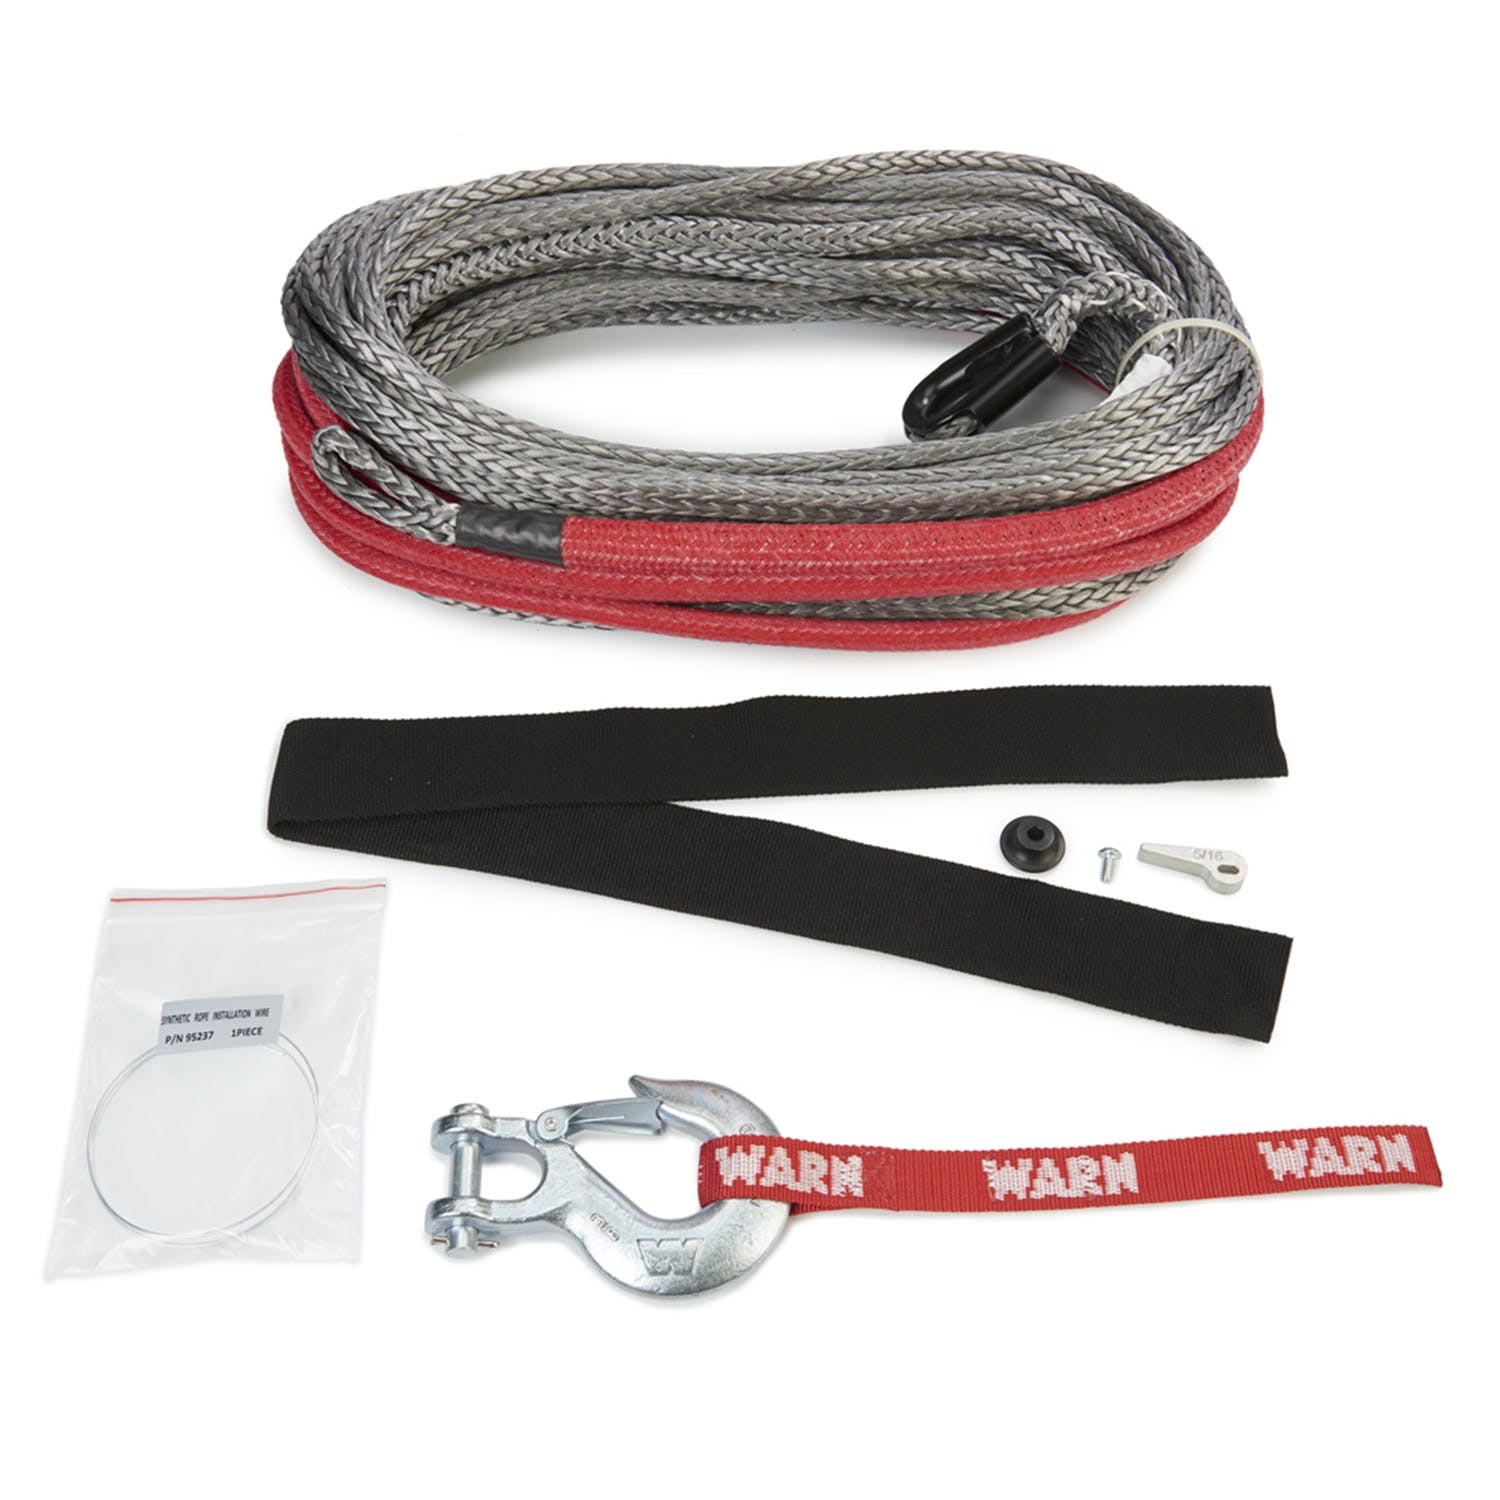 WARN 96040 Standard Duty and Spydura® Synthetic Rope and Extensions